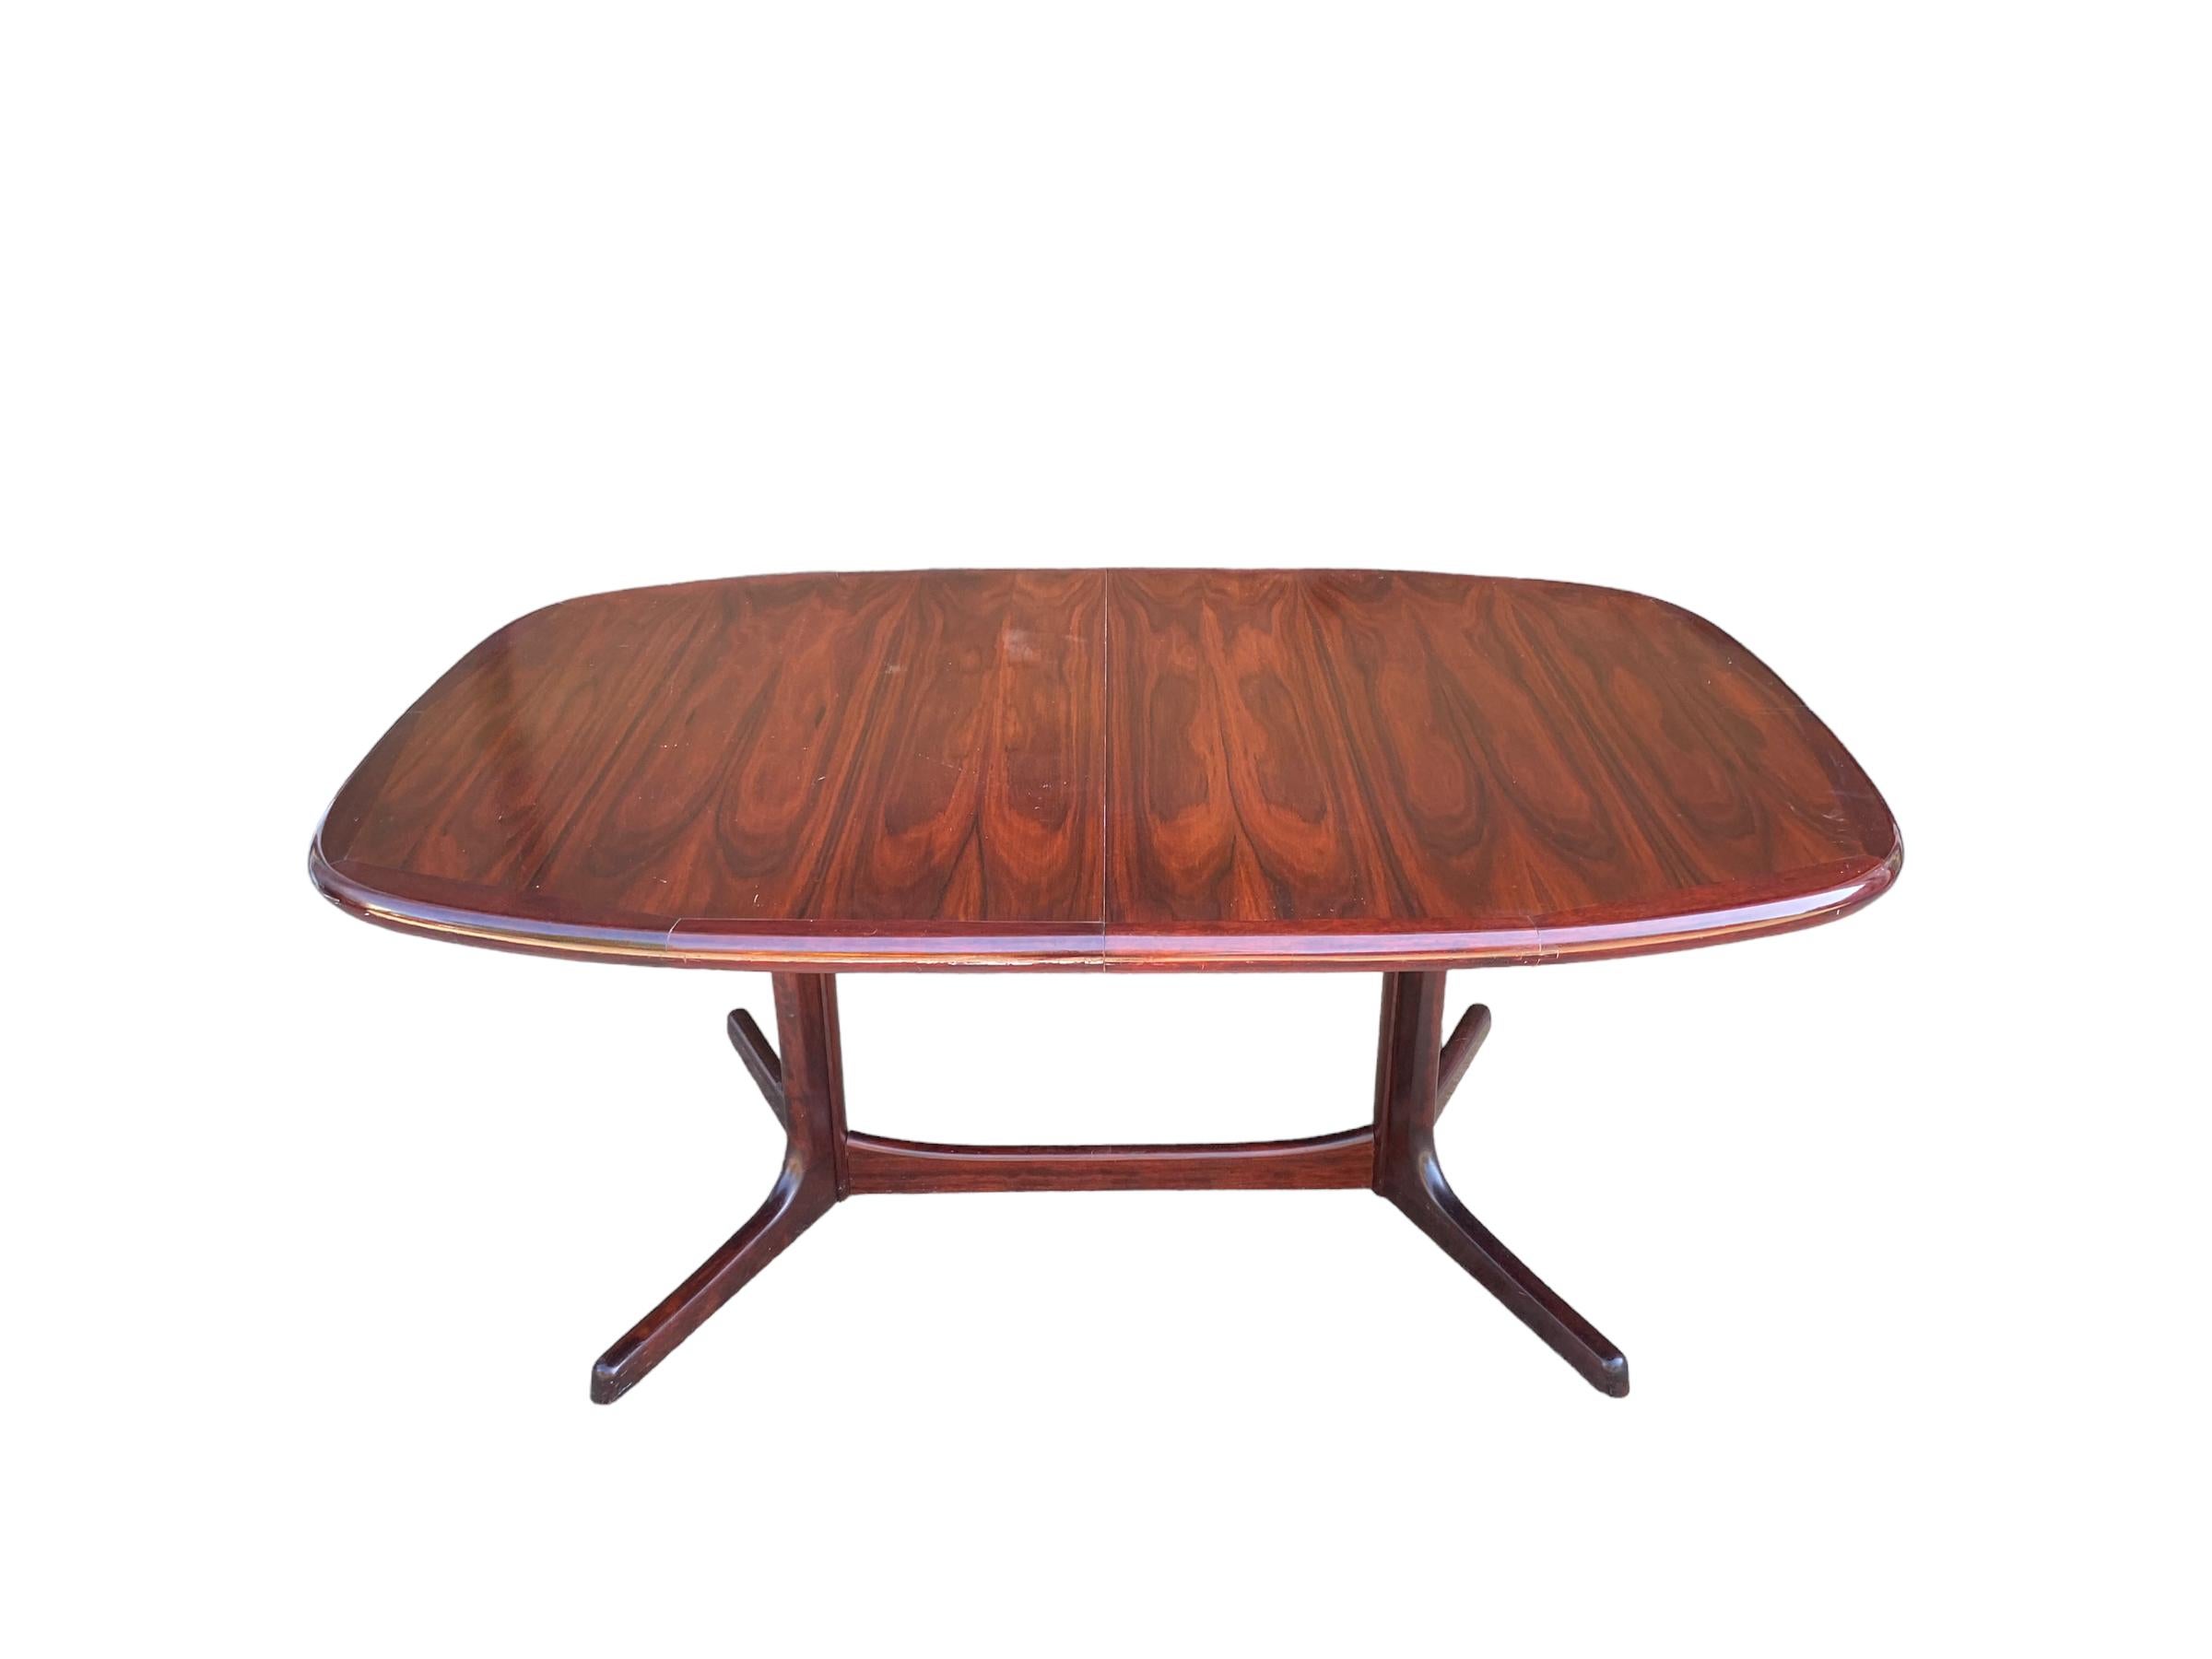 Rosewood dining table by Dyrlund of Denmark. This oval table features stunning grain and rich, even rosewood color. The table has two leaves which can add up to 40” (twenty inches each) for three different table lengths, 65”, 85” and 105”. When not